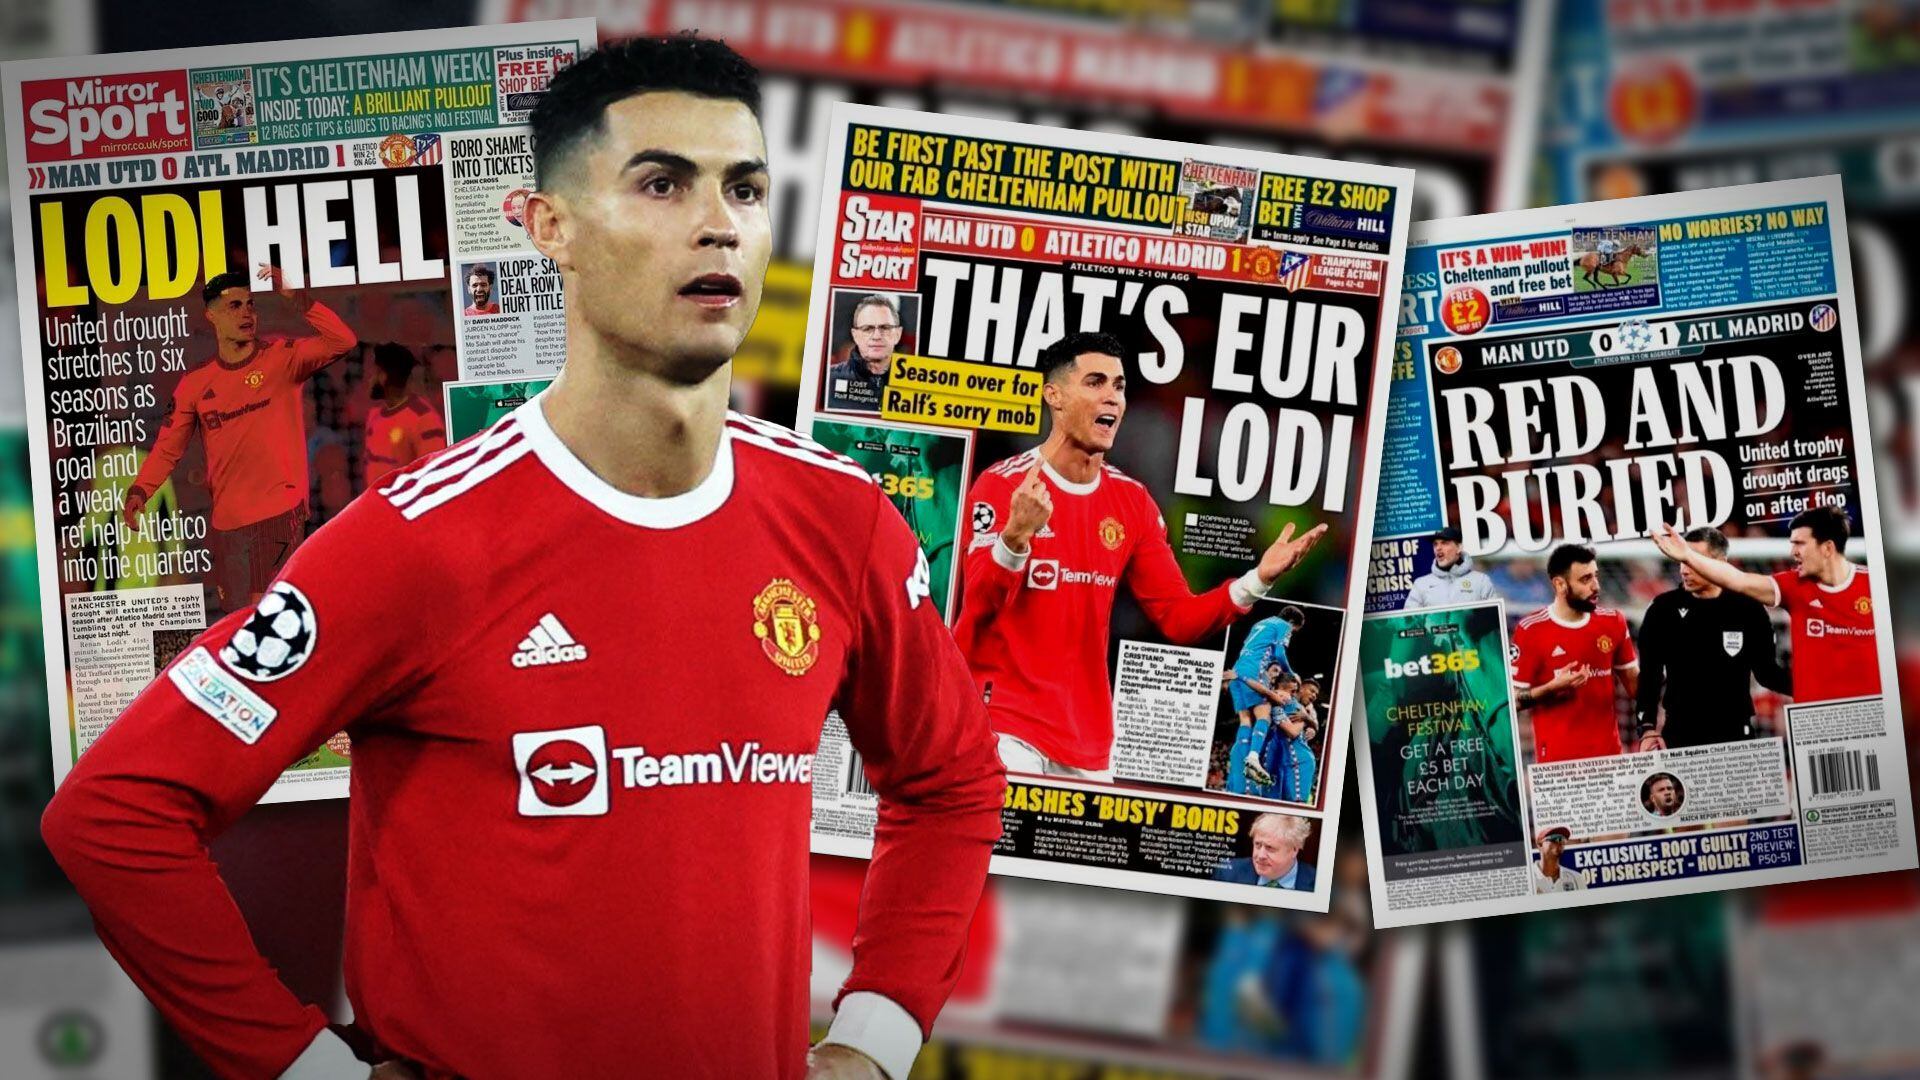 Exclusive first photos of Cristiano Ronaldo in new Man Utd kit for